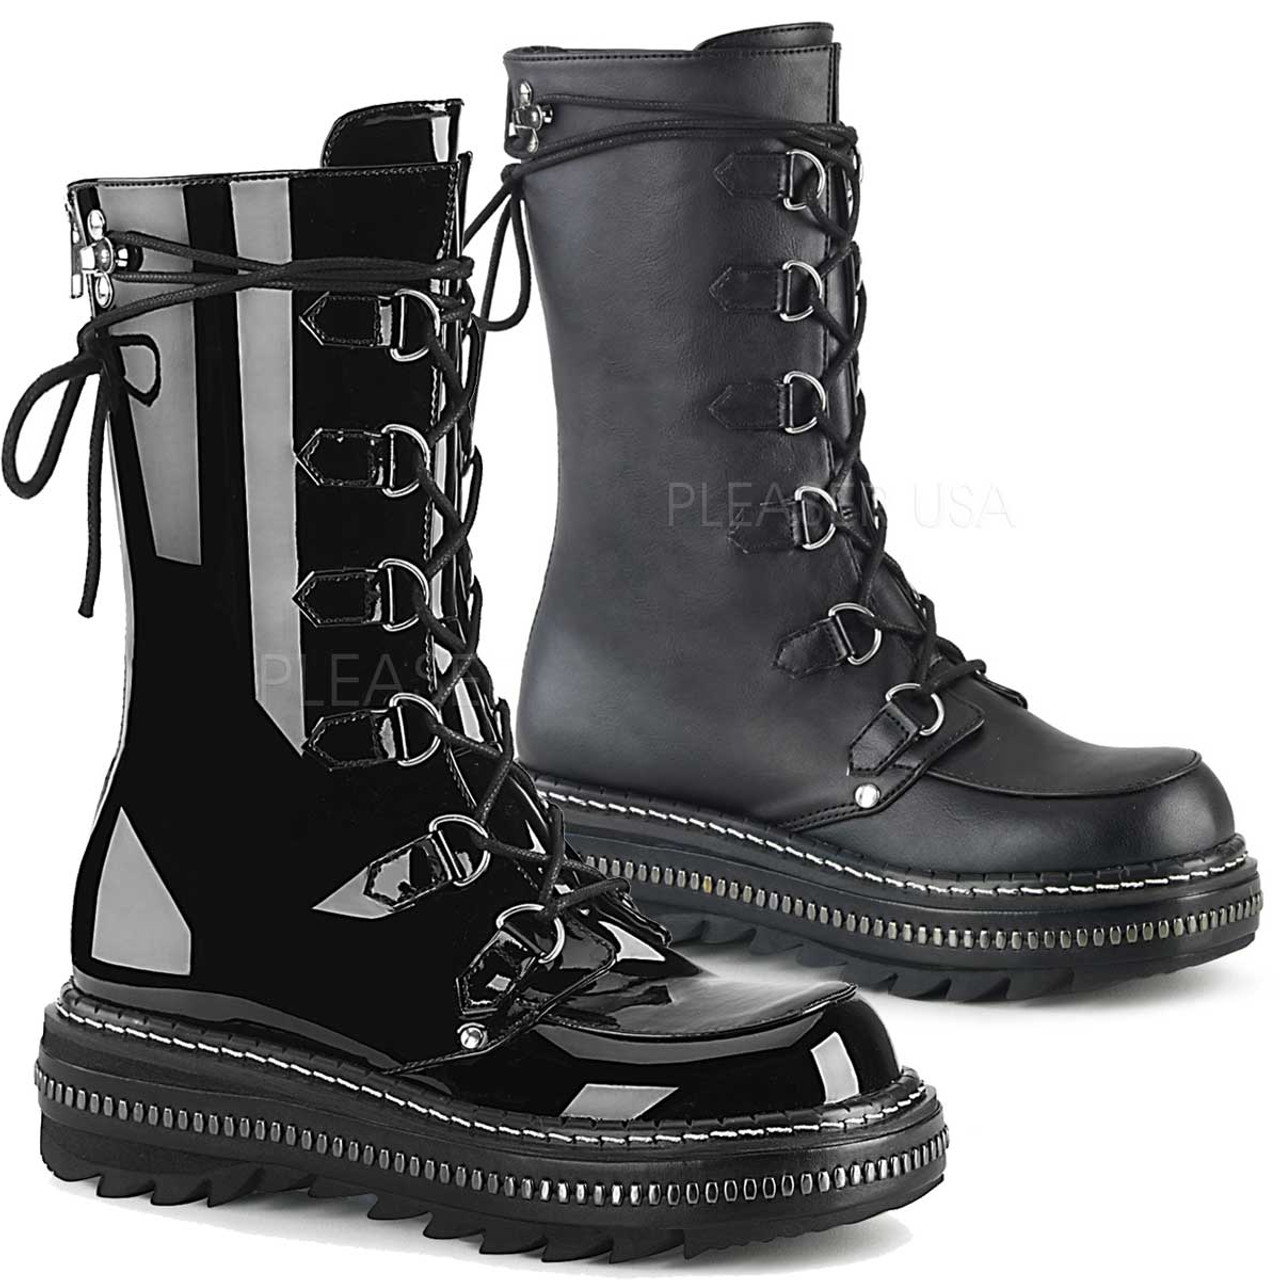 womens black lace up mid calf boots